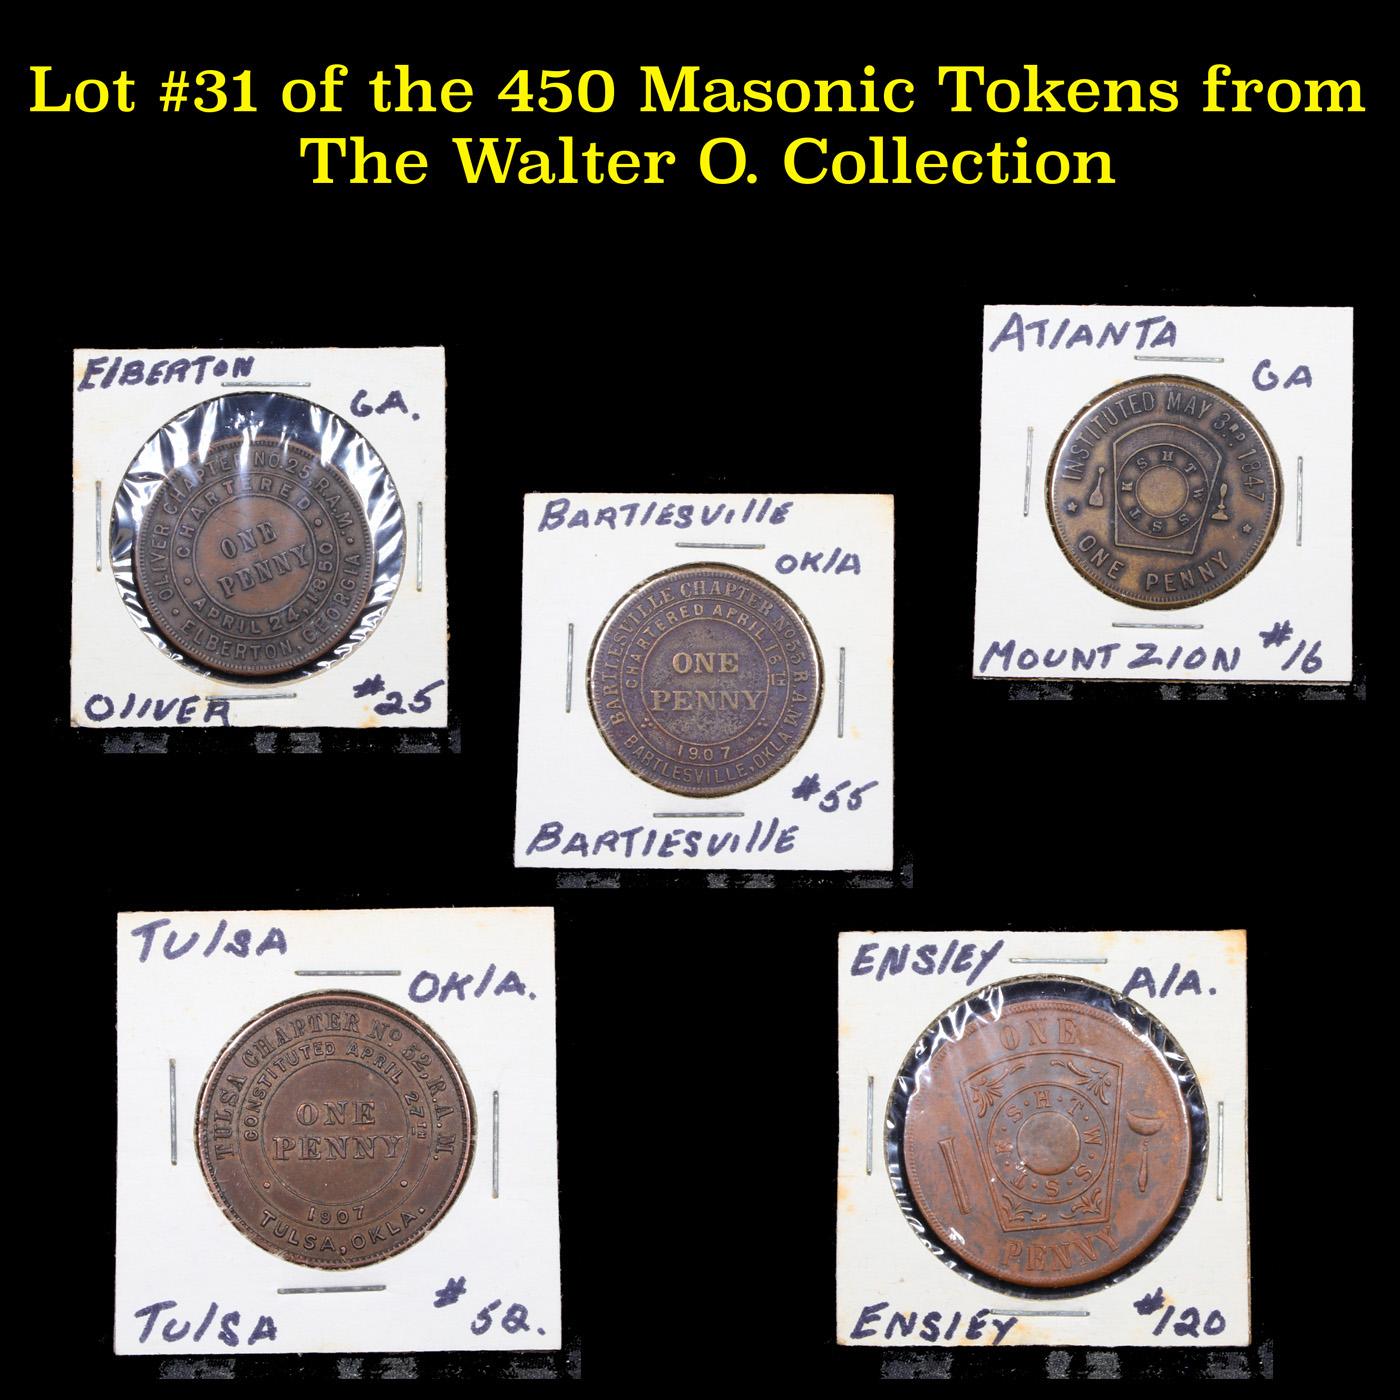 Lot #31 of the 450 Masonic Tokens from The Walter O. Collection